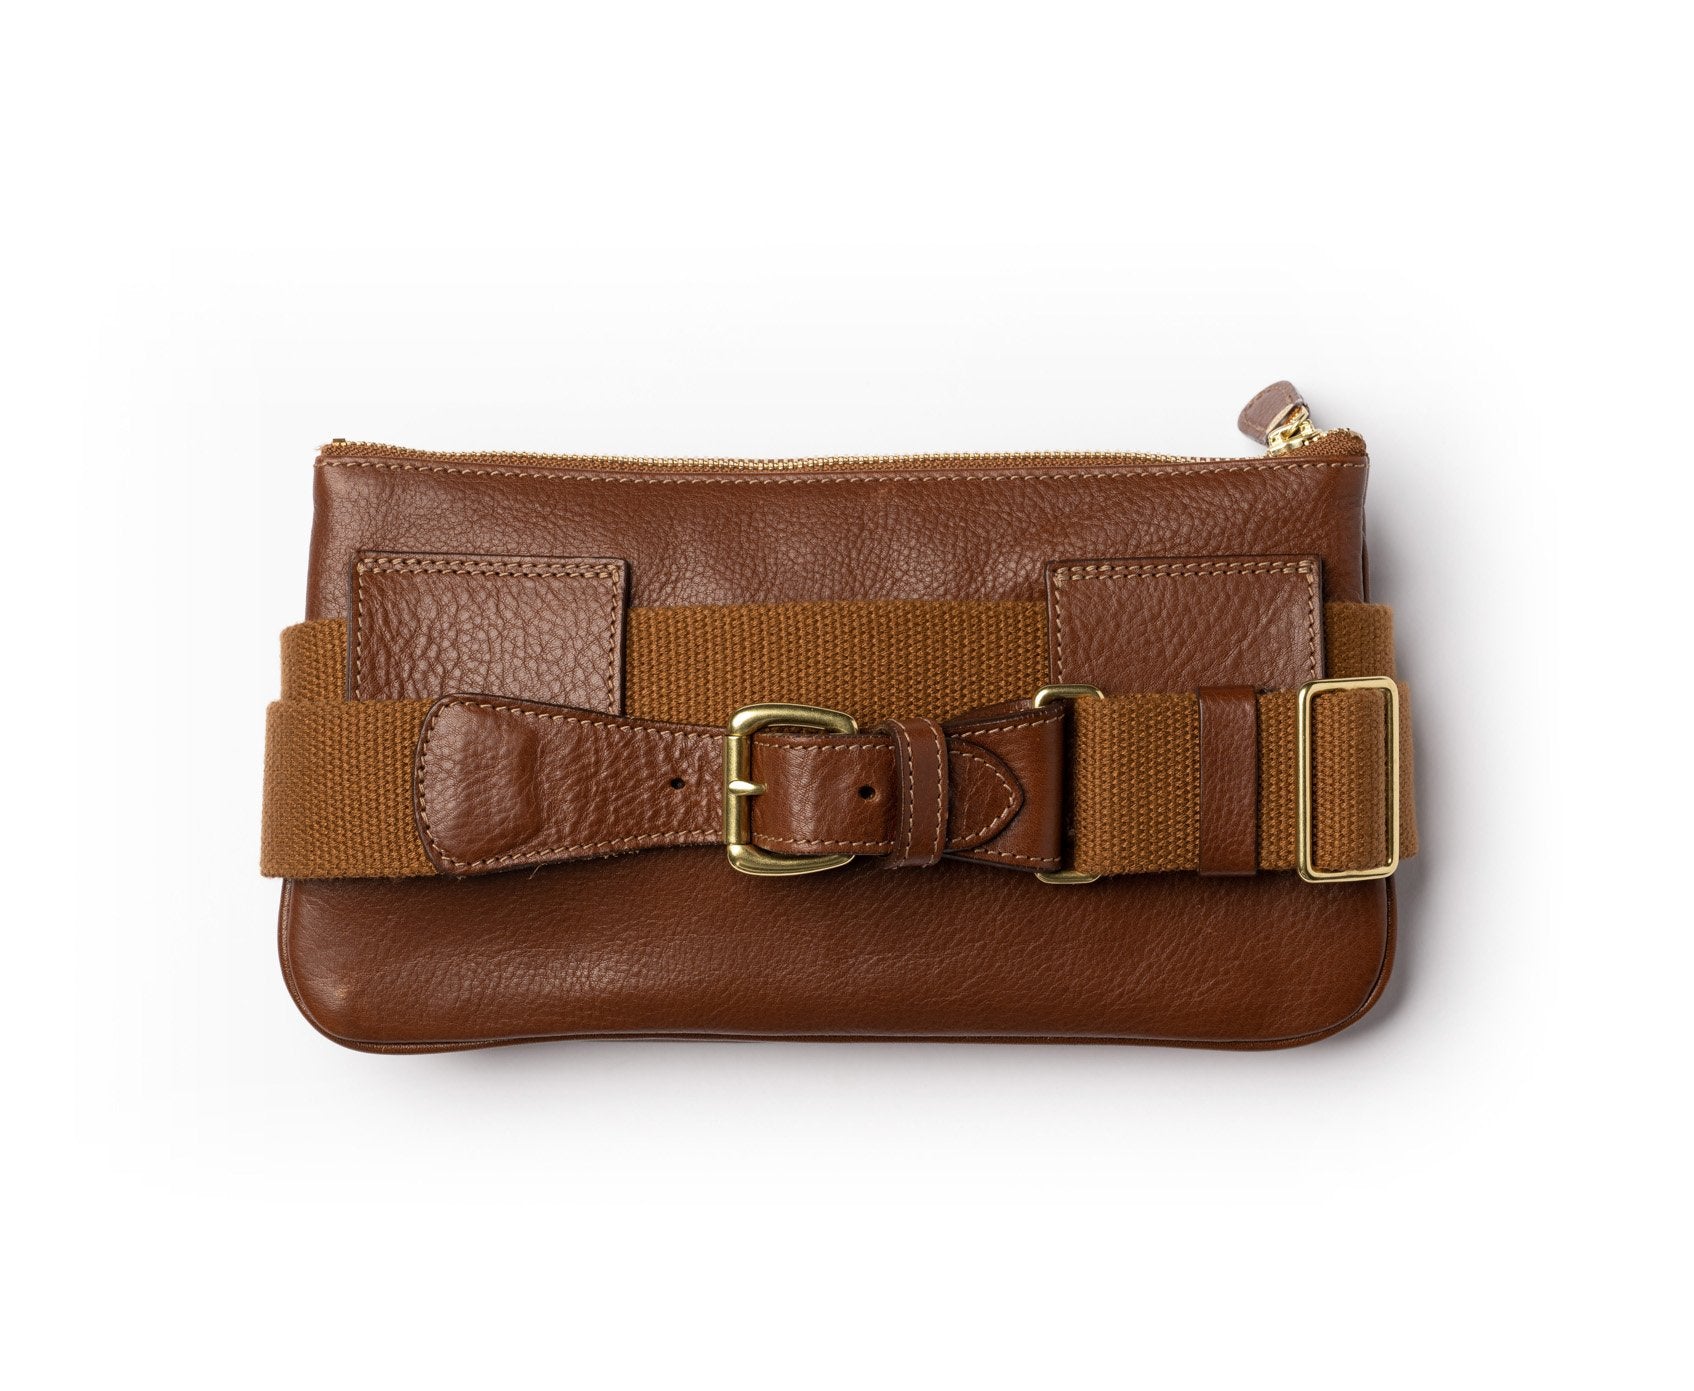 Ghurka - For the minimalist that's hitting the road this summer. Equip your  adventure with the Belt Bag No. 114 in Sand.